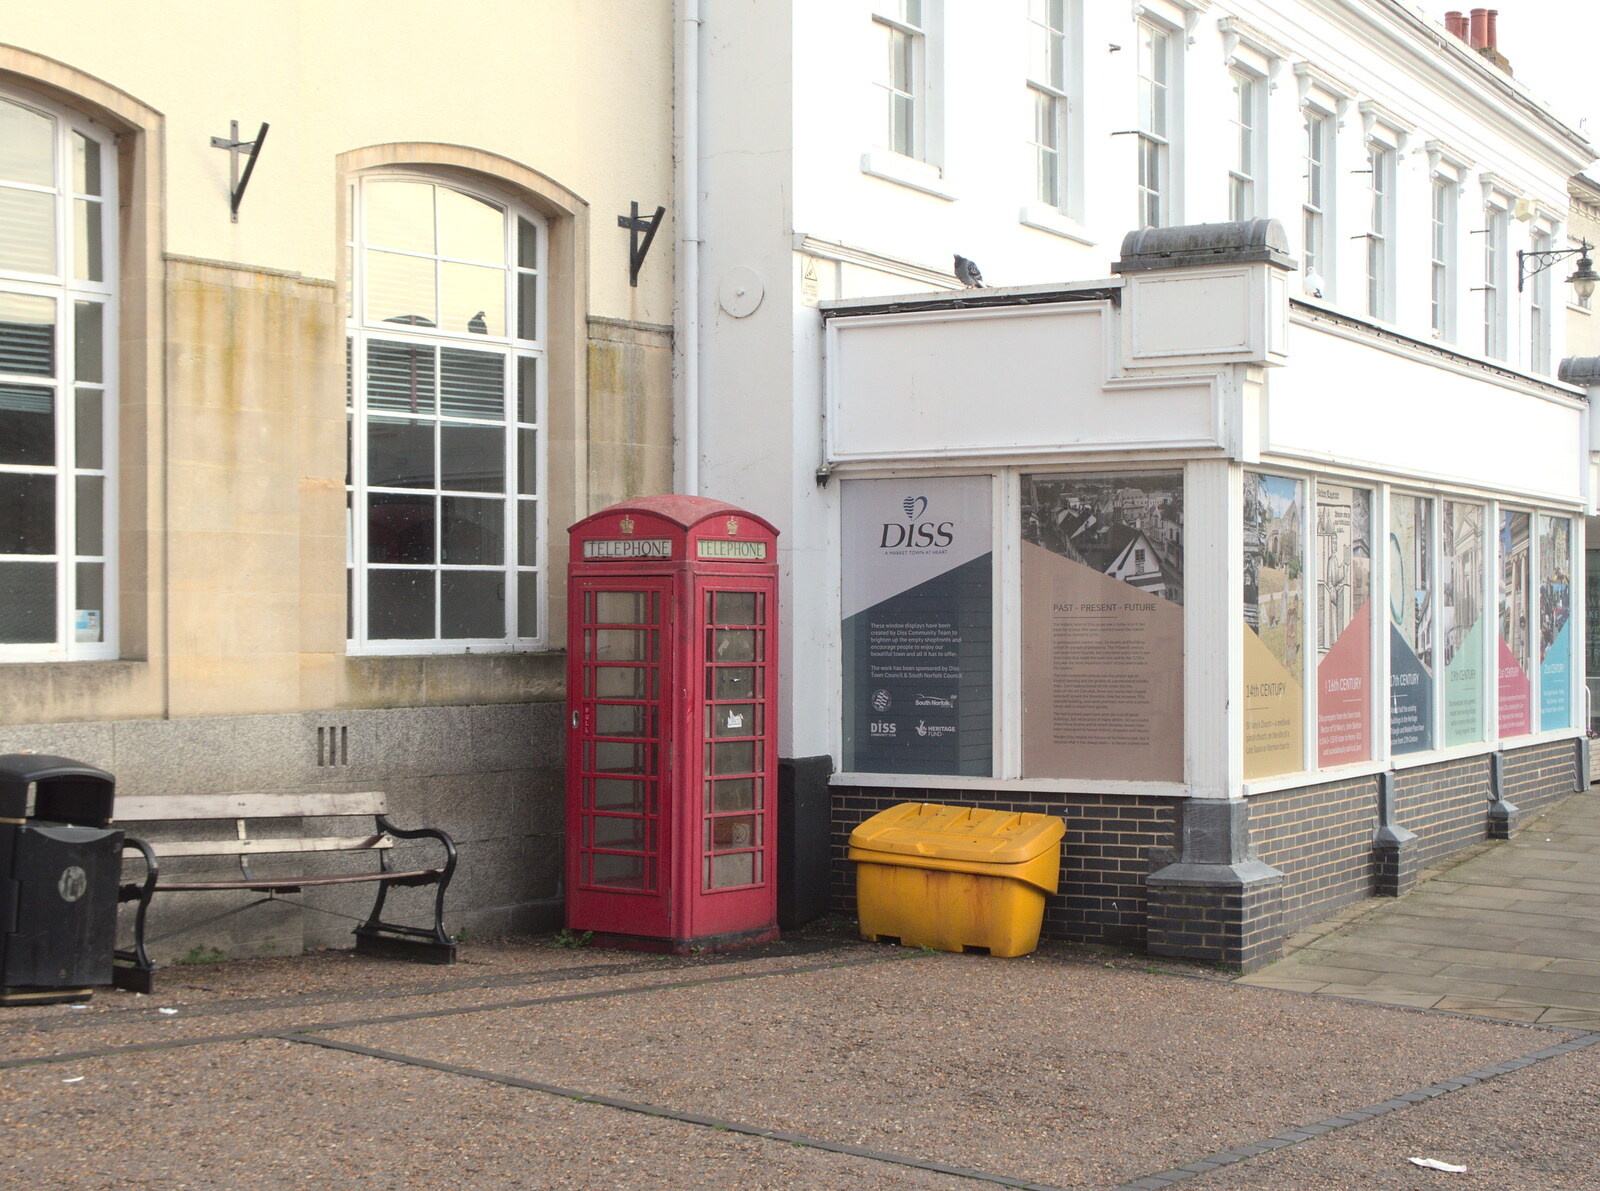 Pizza and Pasta in Bury St. Edmunds, Suffolk - 30th October 2022: A K6 phonebox in need of some TLC